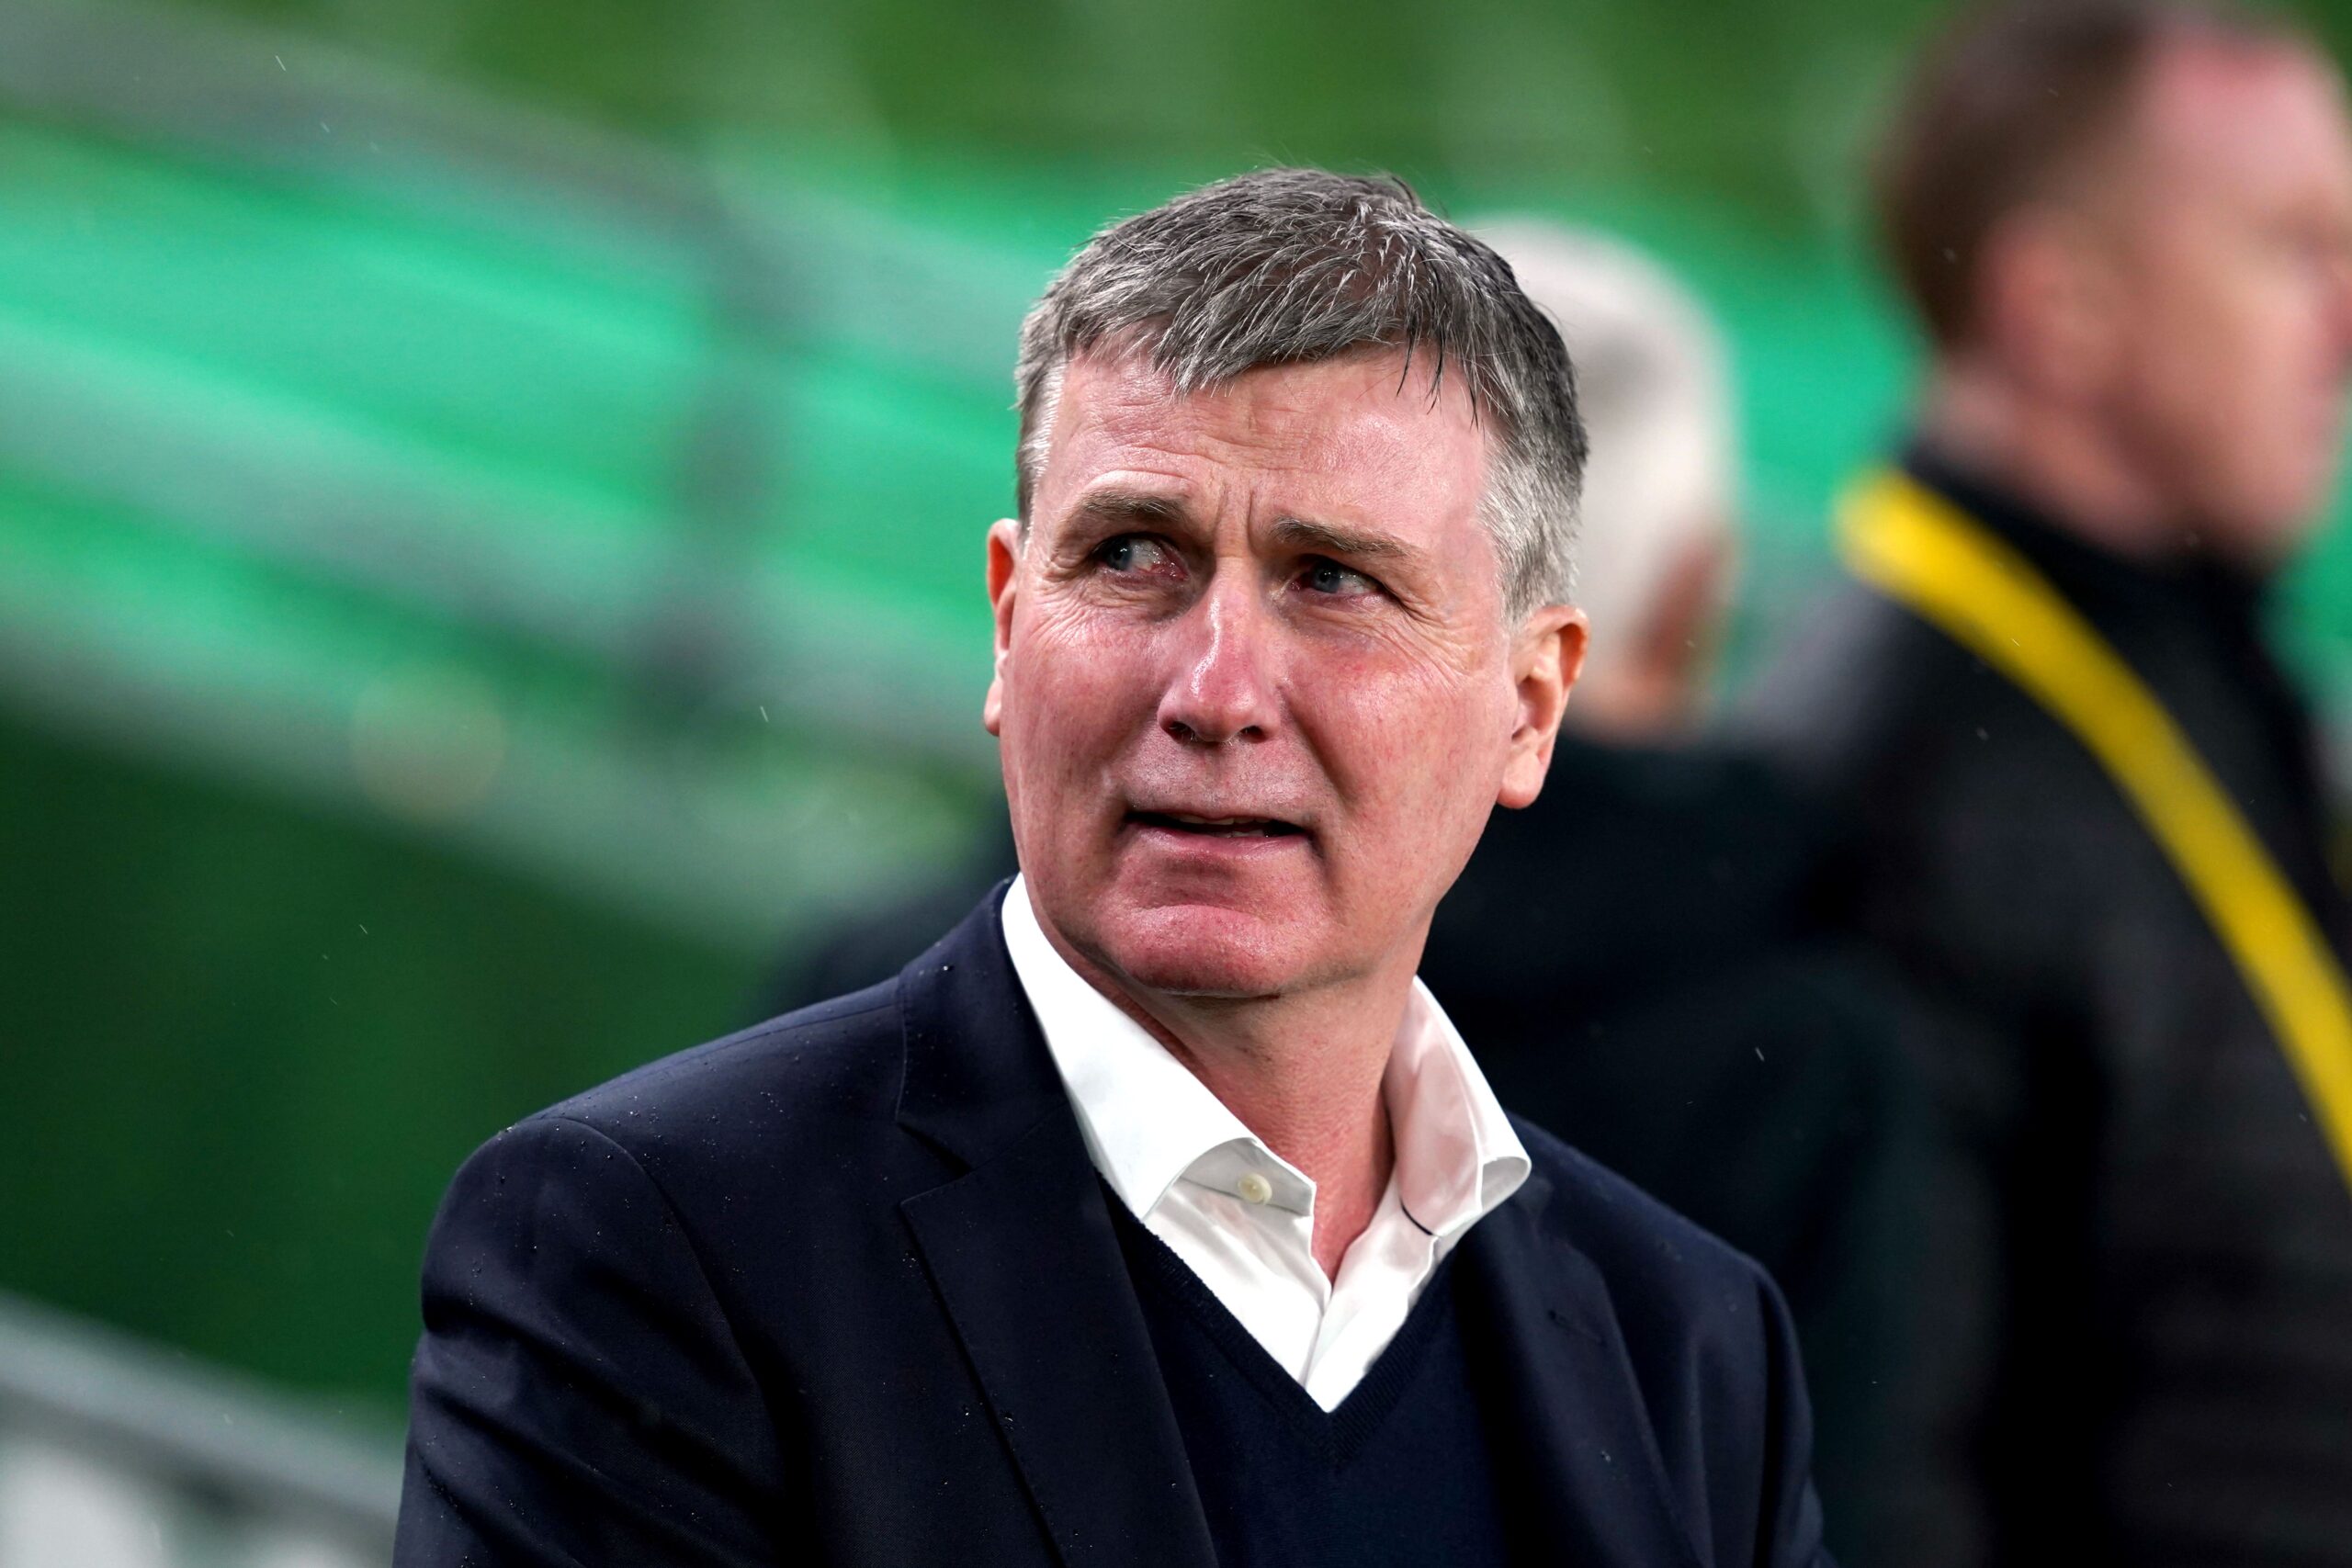 Stephen Kenny's era as Republic of Ireland manager is over after the Football Association of Ireland announced it will not be renewing his deal.